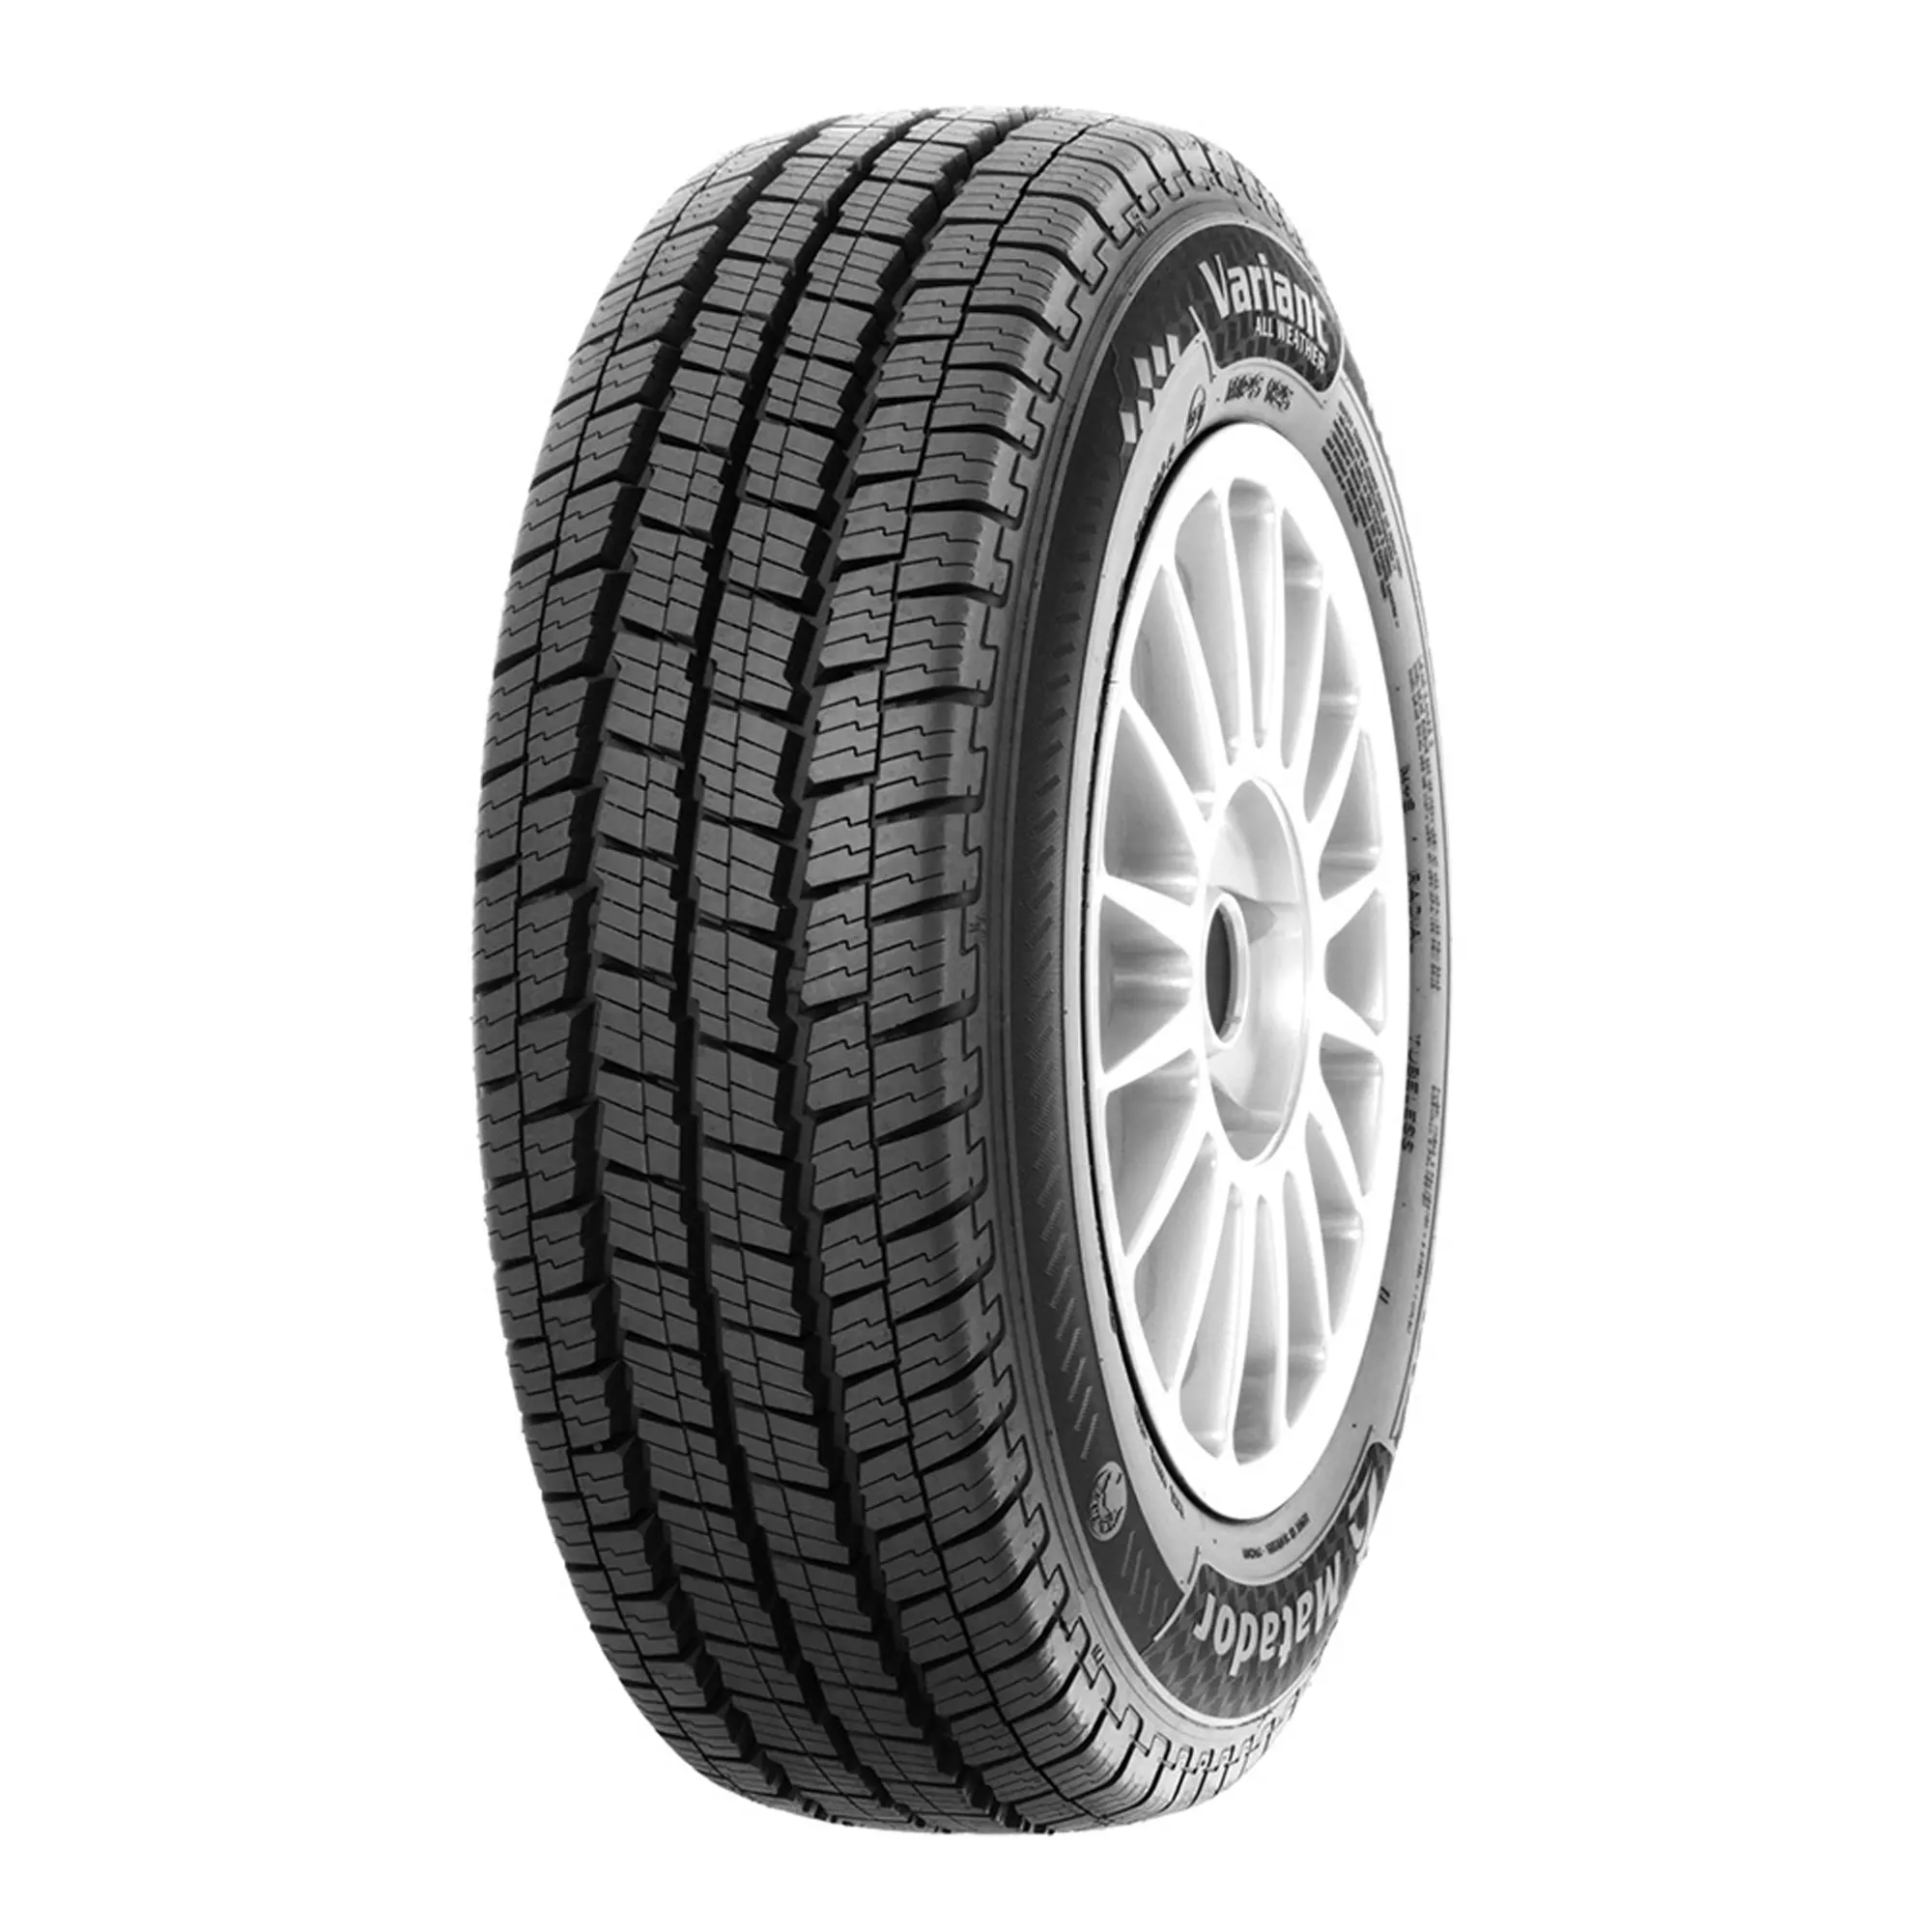 Шина 205/65R15C 104/102T MPS125 VARIANT All Weather